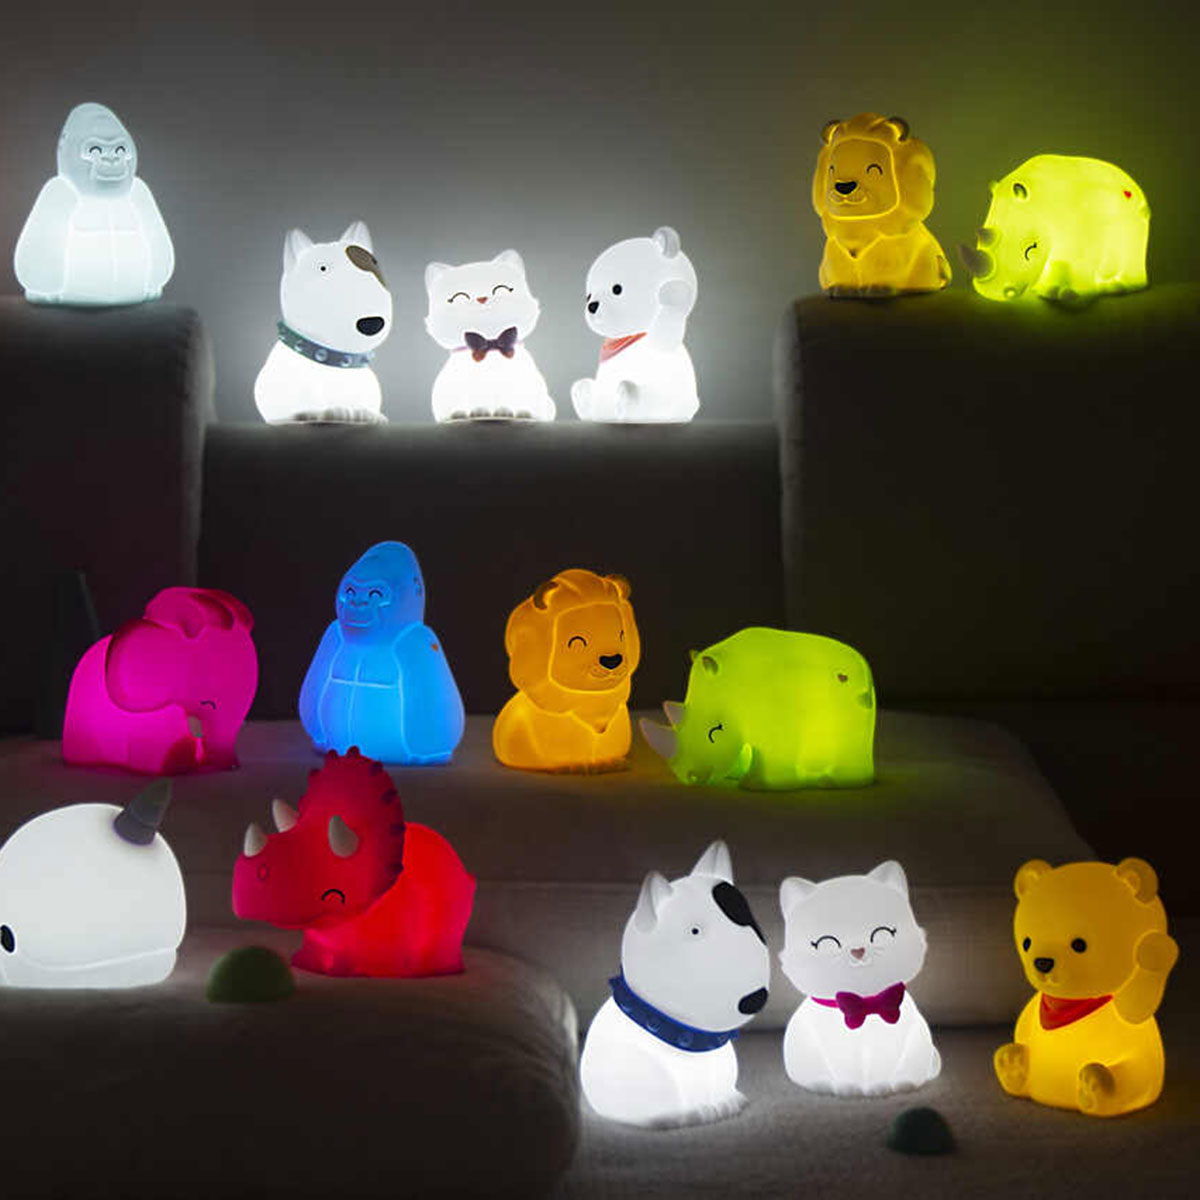 Soft rechargeable silicone night light - Dog